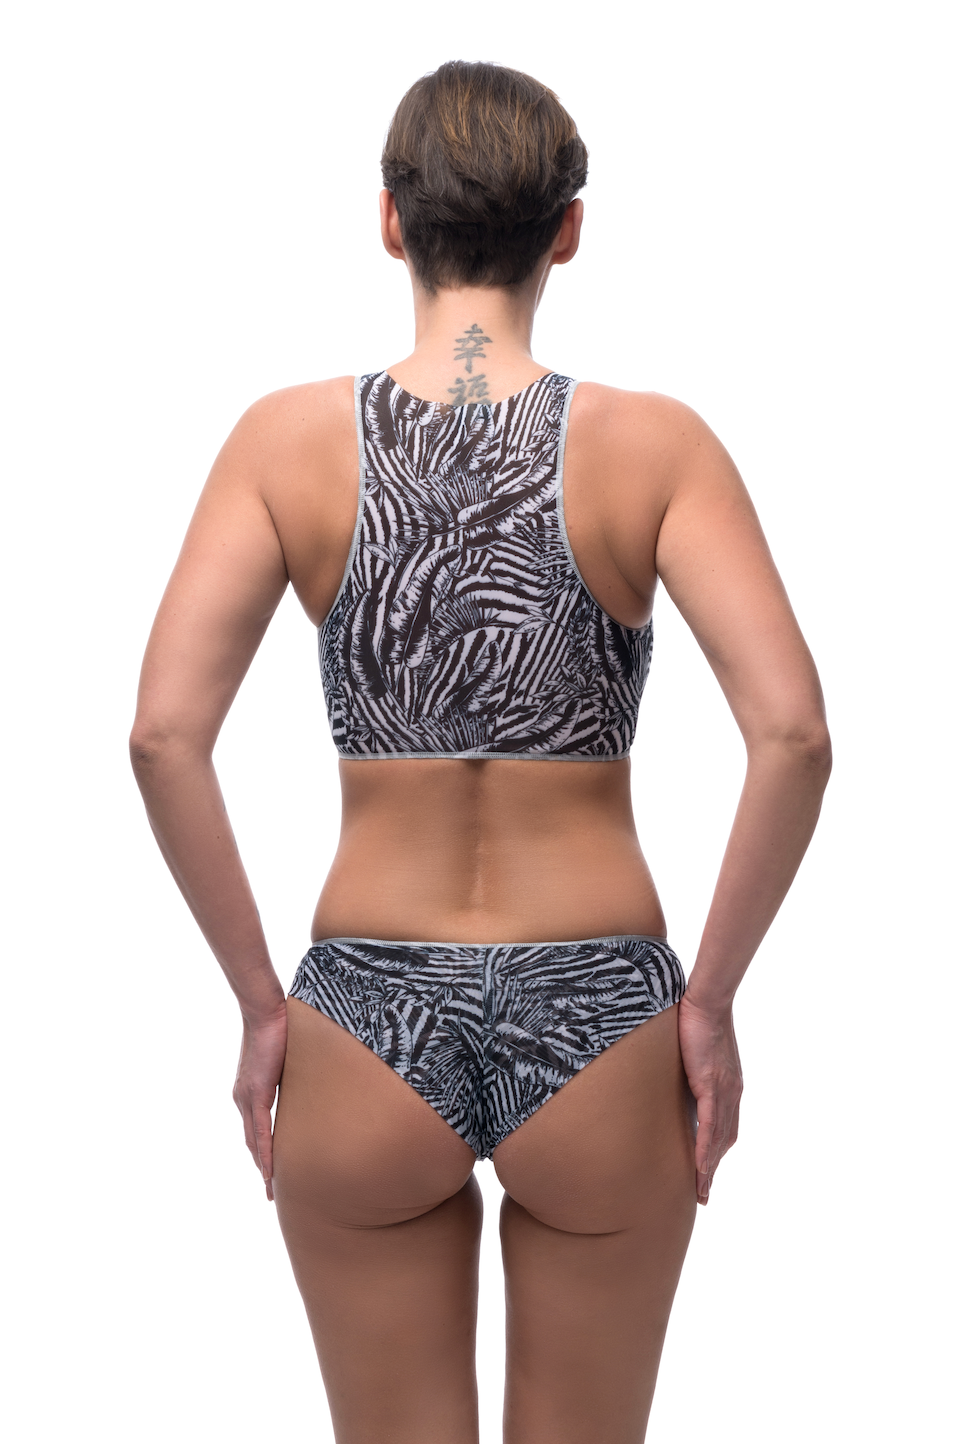 This file features sustainable tan-through smart swimsuits adorned with a trendy Fake Zebra print. Included is a sport top, ideal for beach activities. Shop now for sun-safe style!